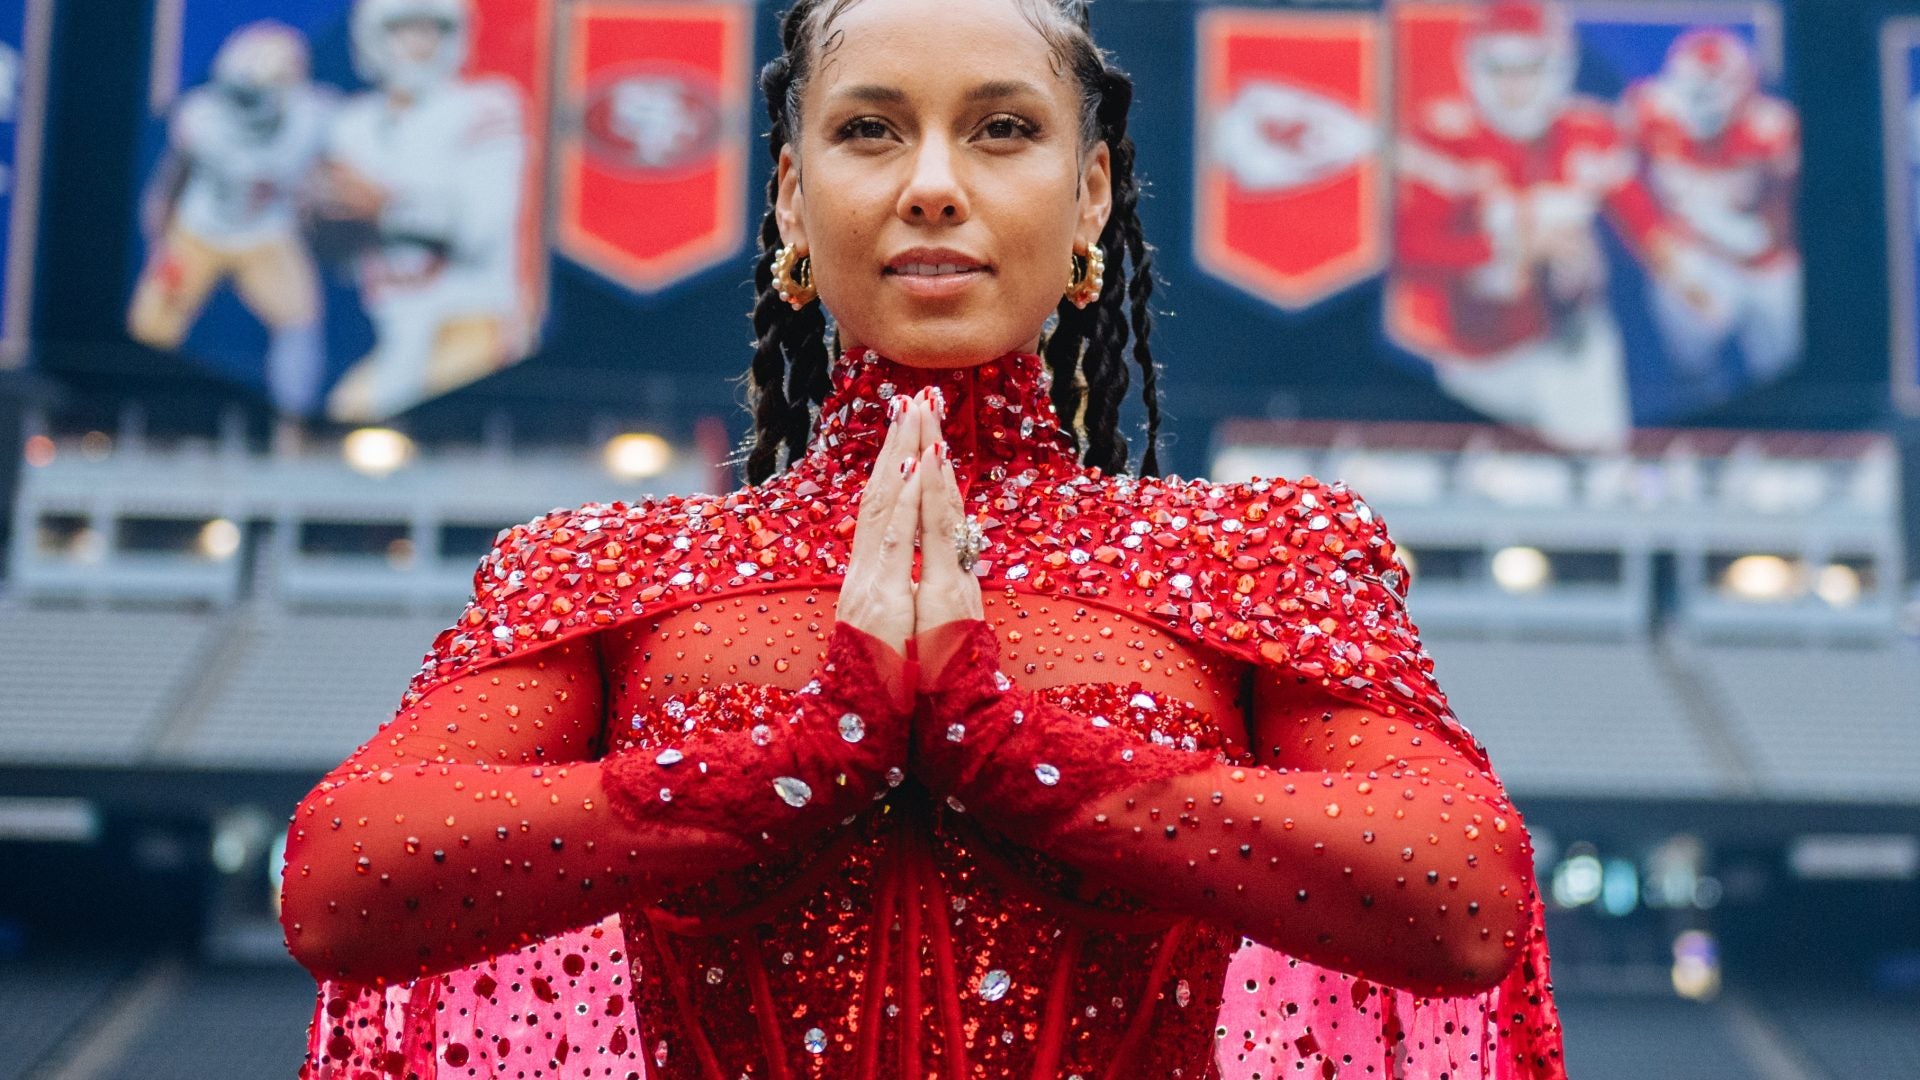 Alicia Keys Glows During The Super Bowl Half-Time Show